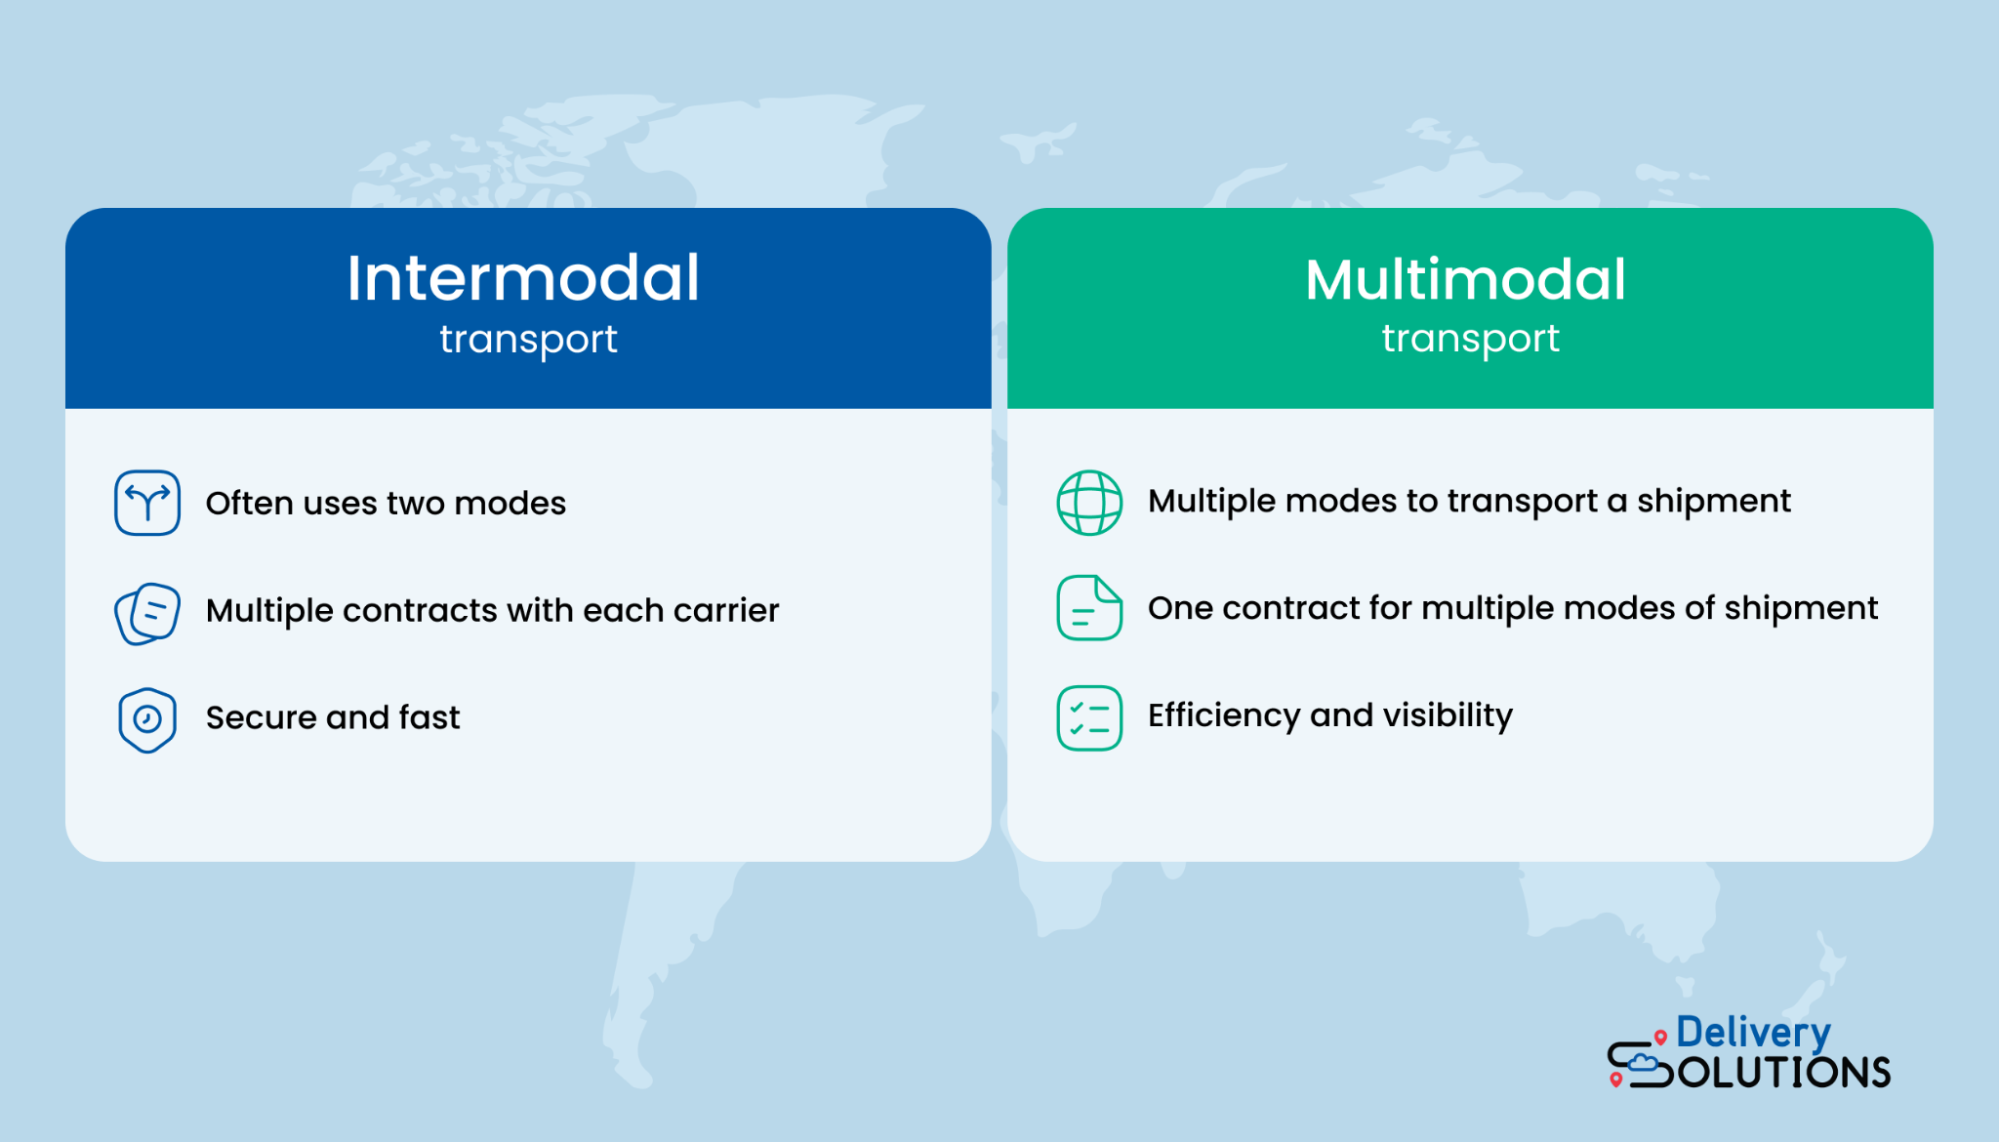 The difference between multimodal and intermodal shipping options